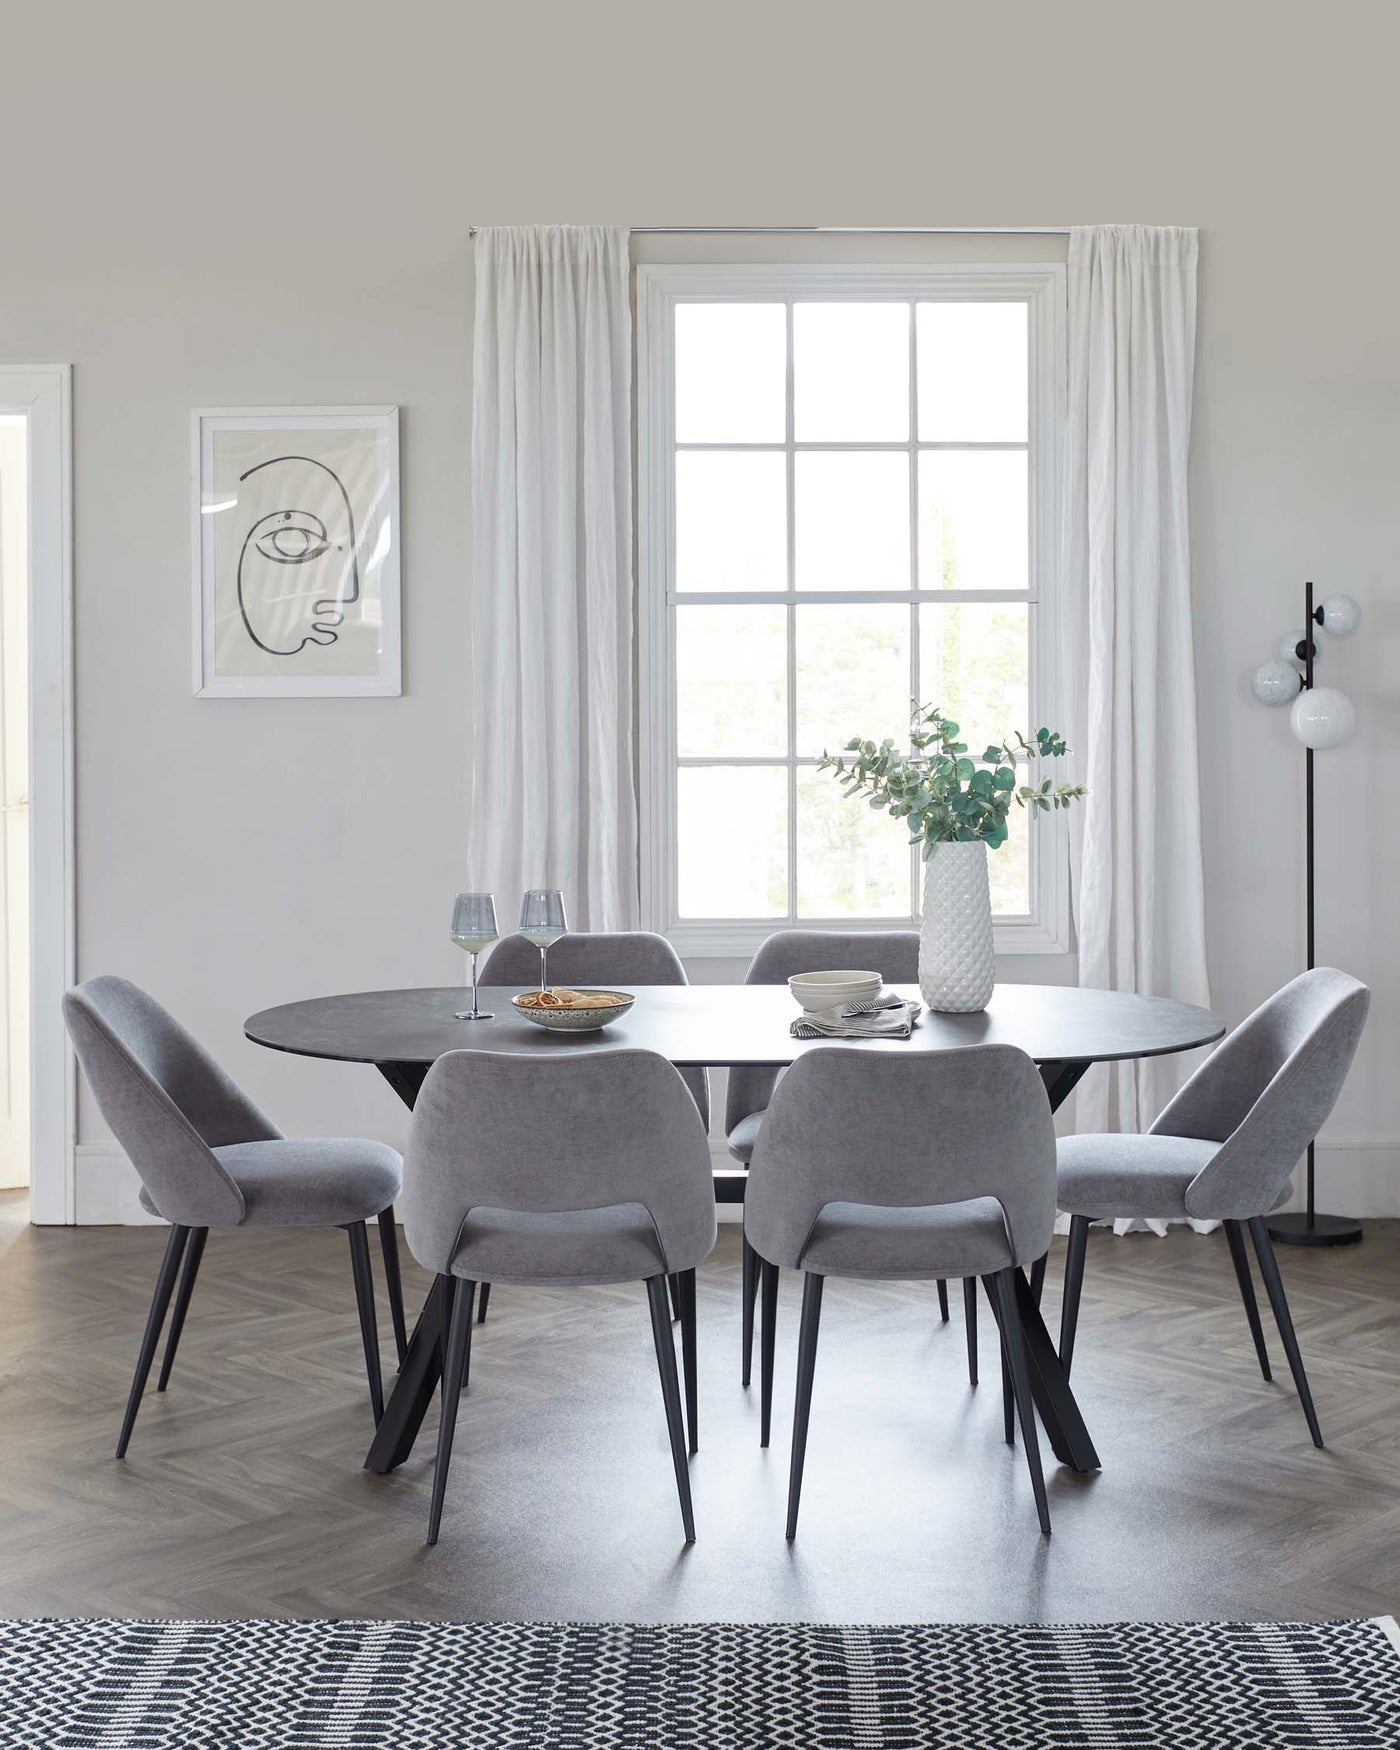 A modern dining area featuring a circular table with a dark stone top and black angular legs, surrounded by six plush, light grey upholstered chairs with tapered black legs. A stylish white vase with green foliage sits atop the table. The setting is complemented by a geometric black and white area rug beneath.